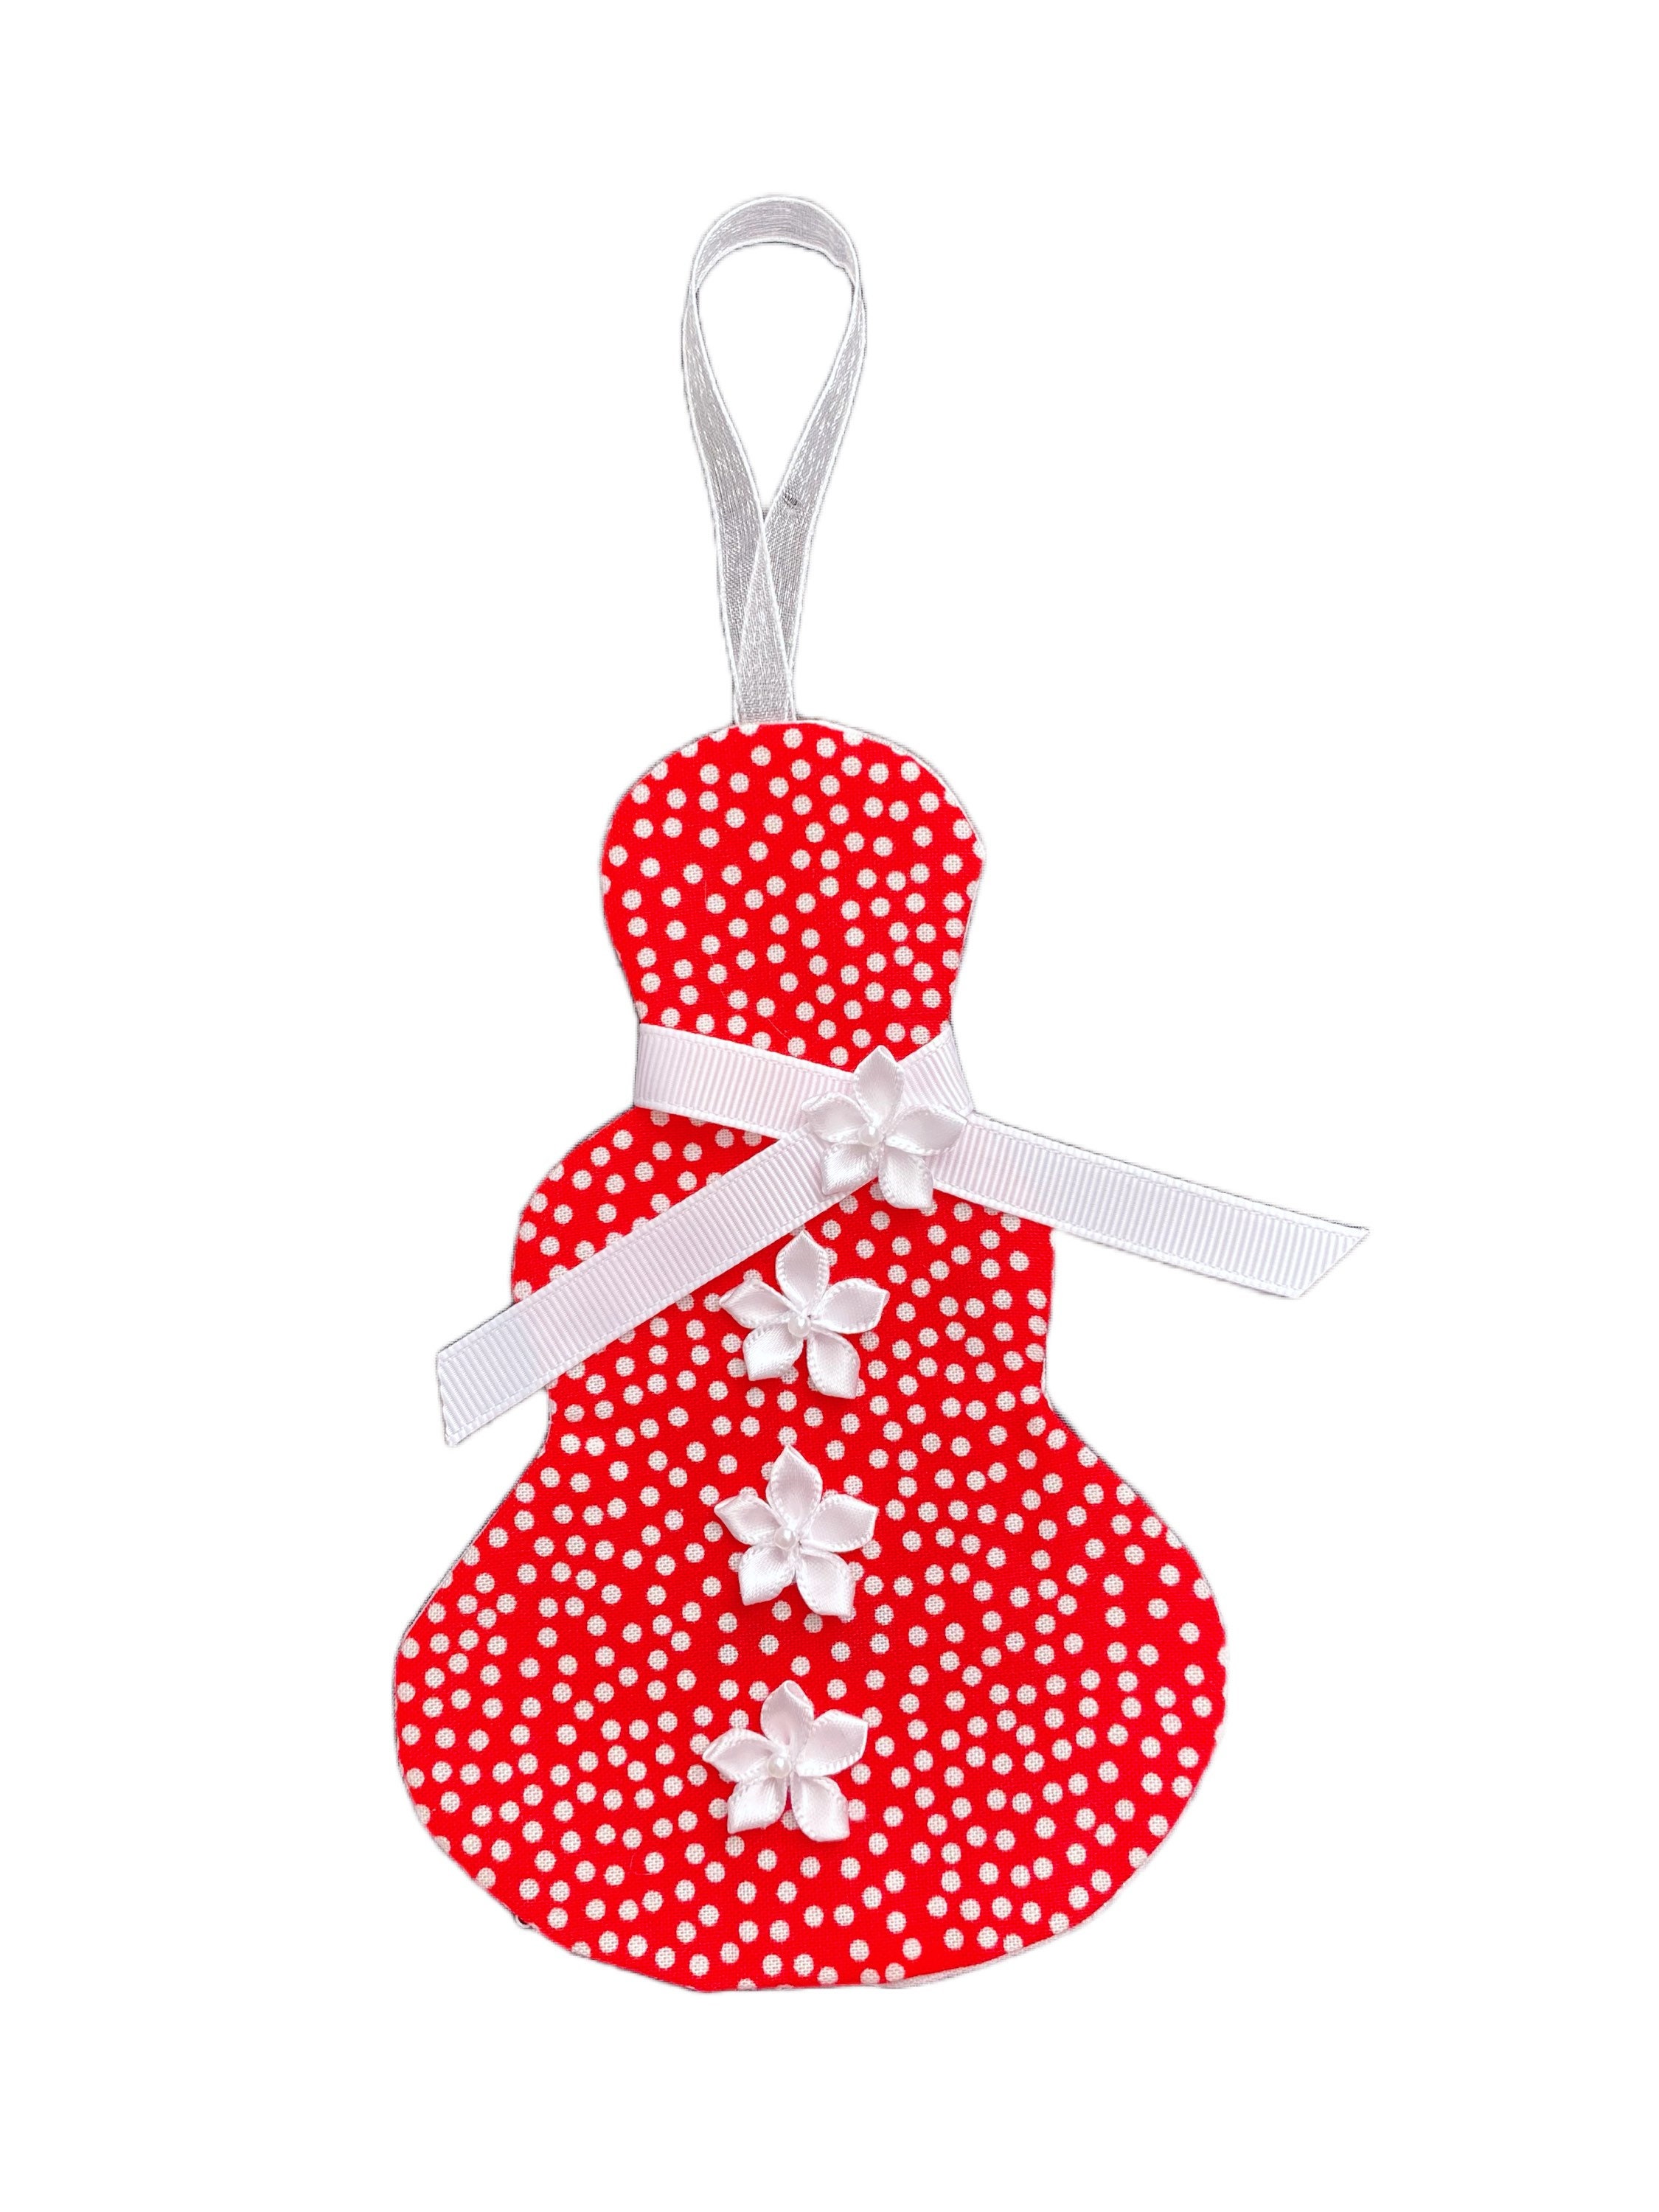 Fabric Snowman Christmas Tree Ornament Sewing Pattern & VIDEO Tutorial PDF  Easy DIY Holiday Decor Gift to Sew Beginners Sewing Project -  Finland